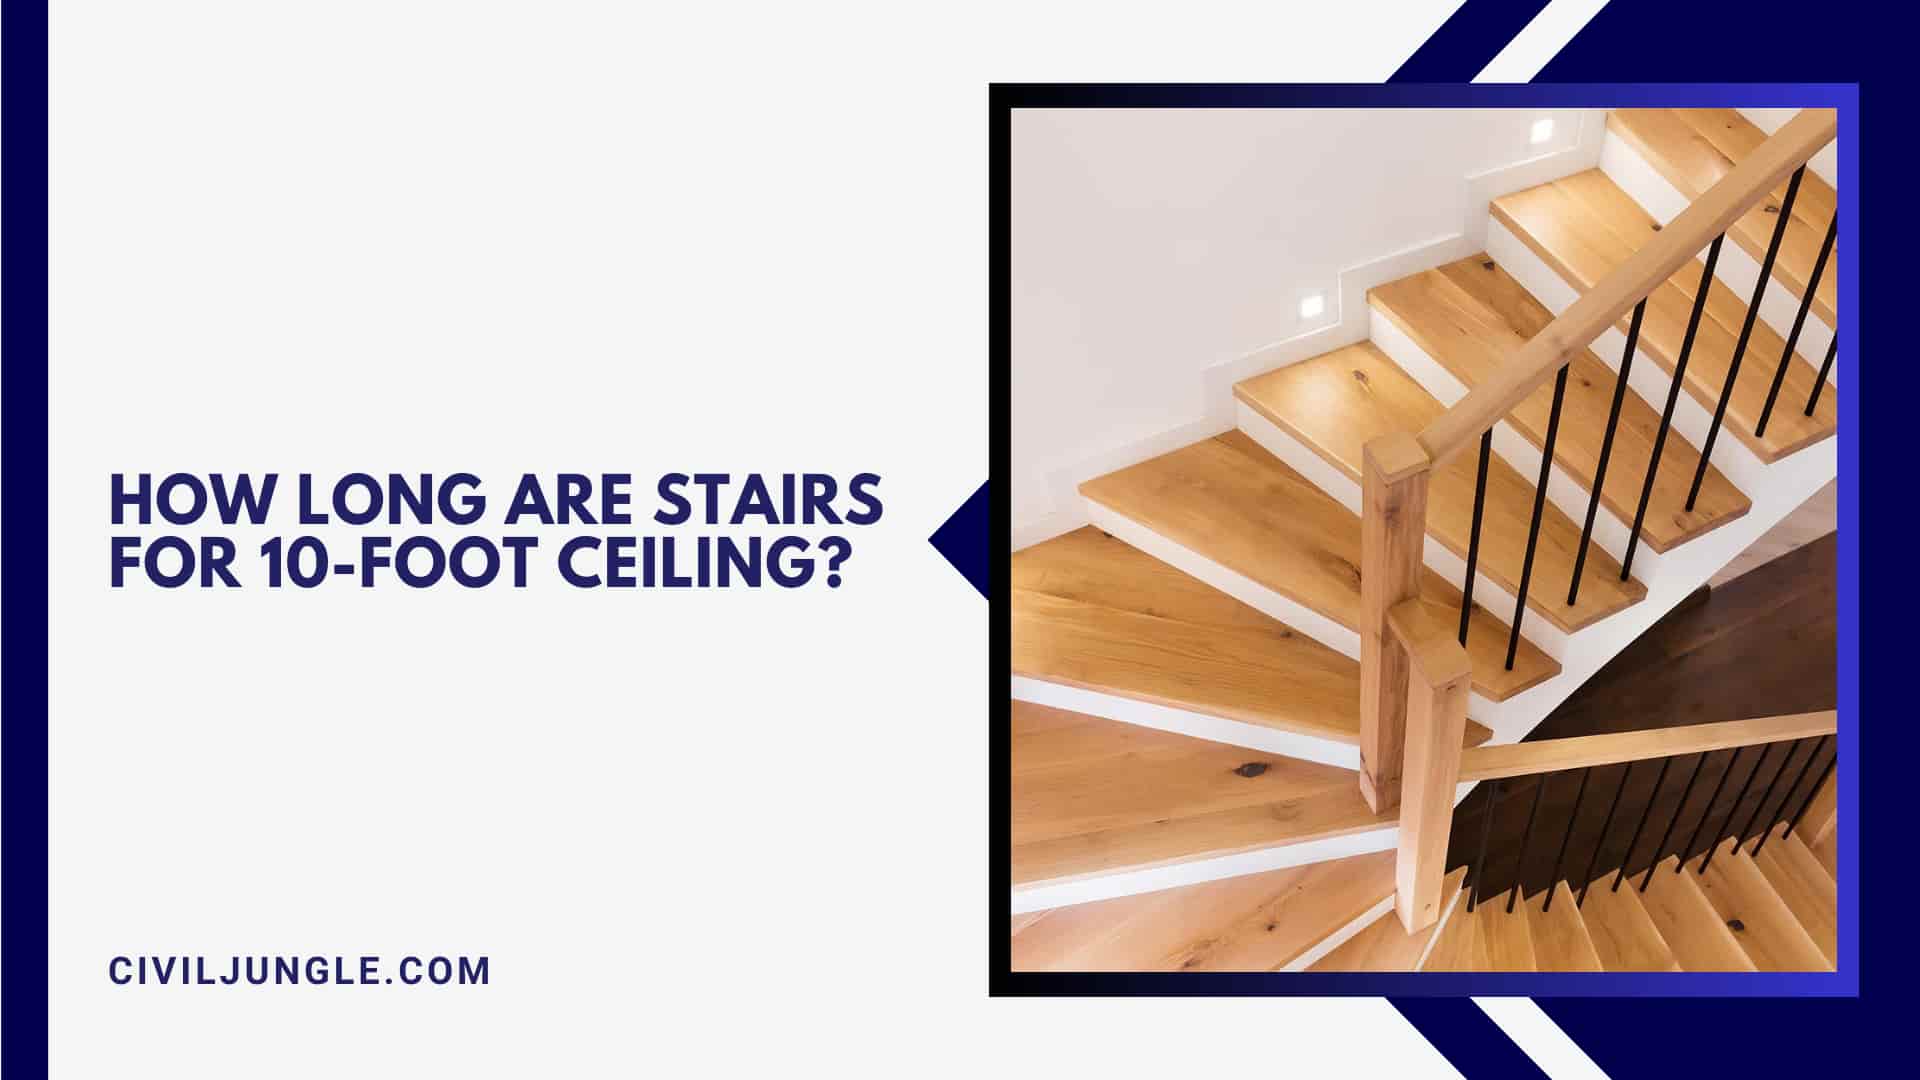 How Long Are Stairs for 10-Foot Ceiling?